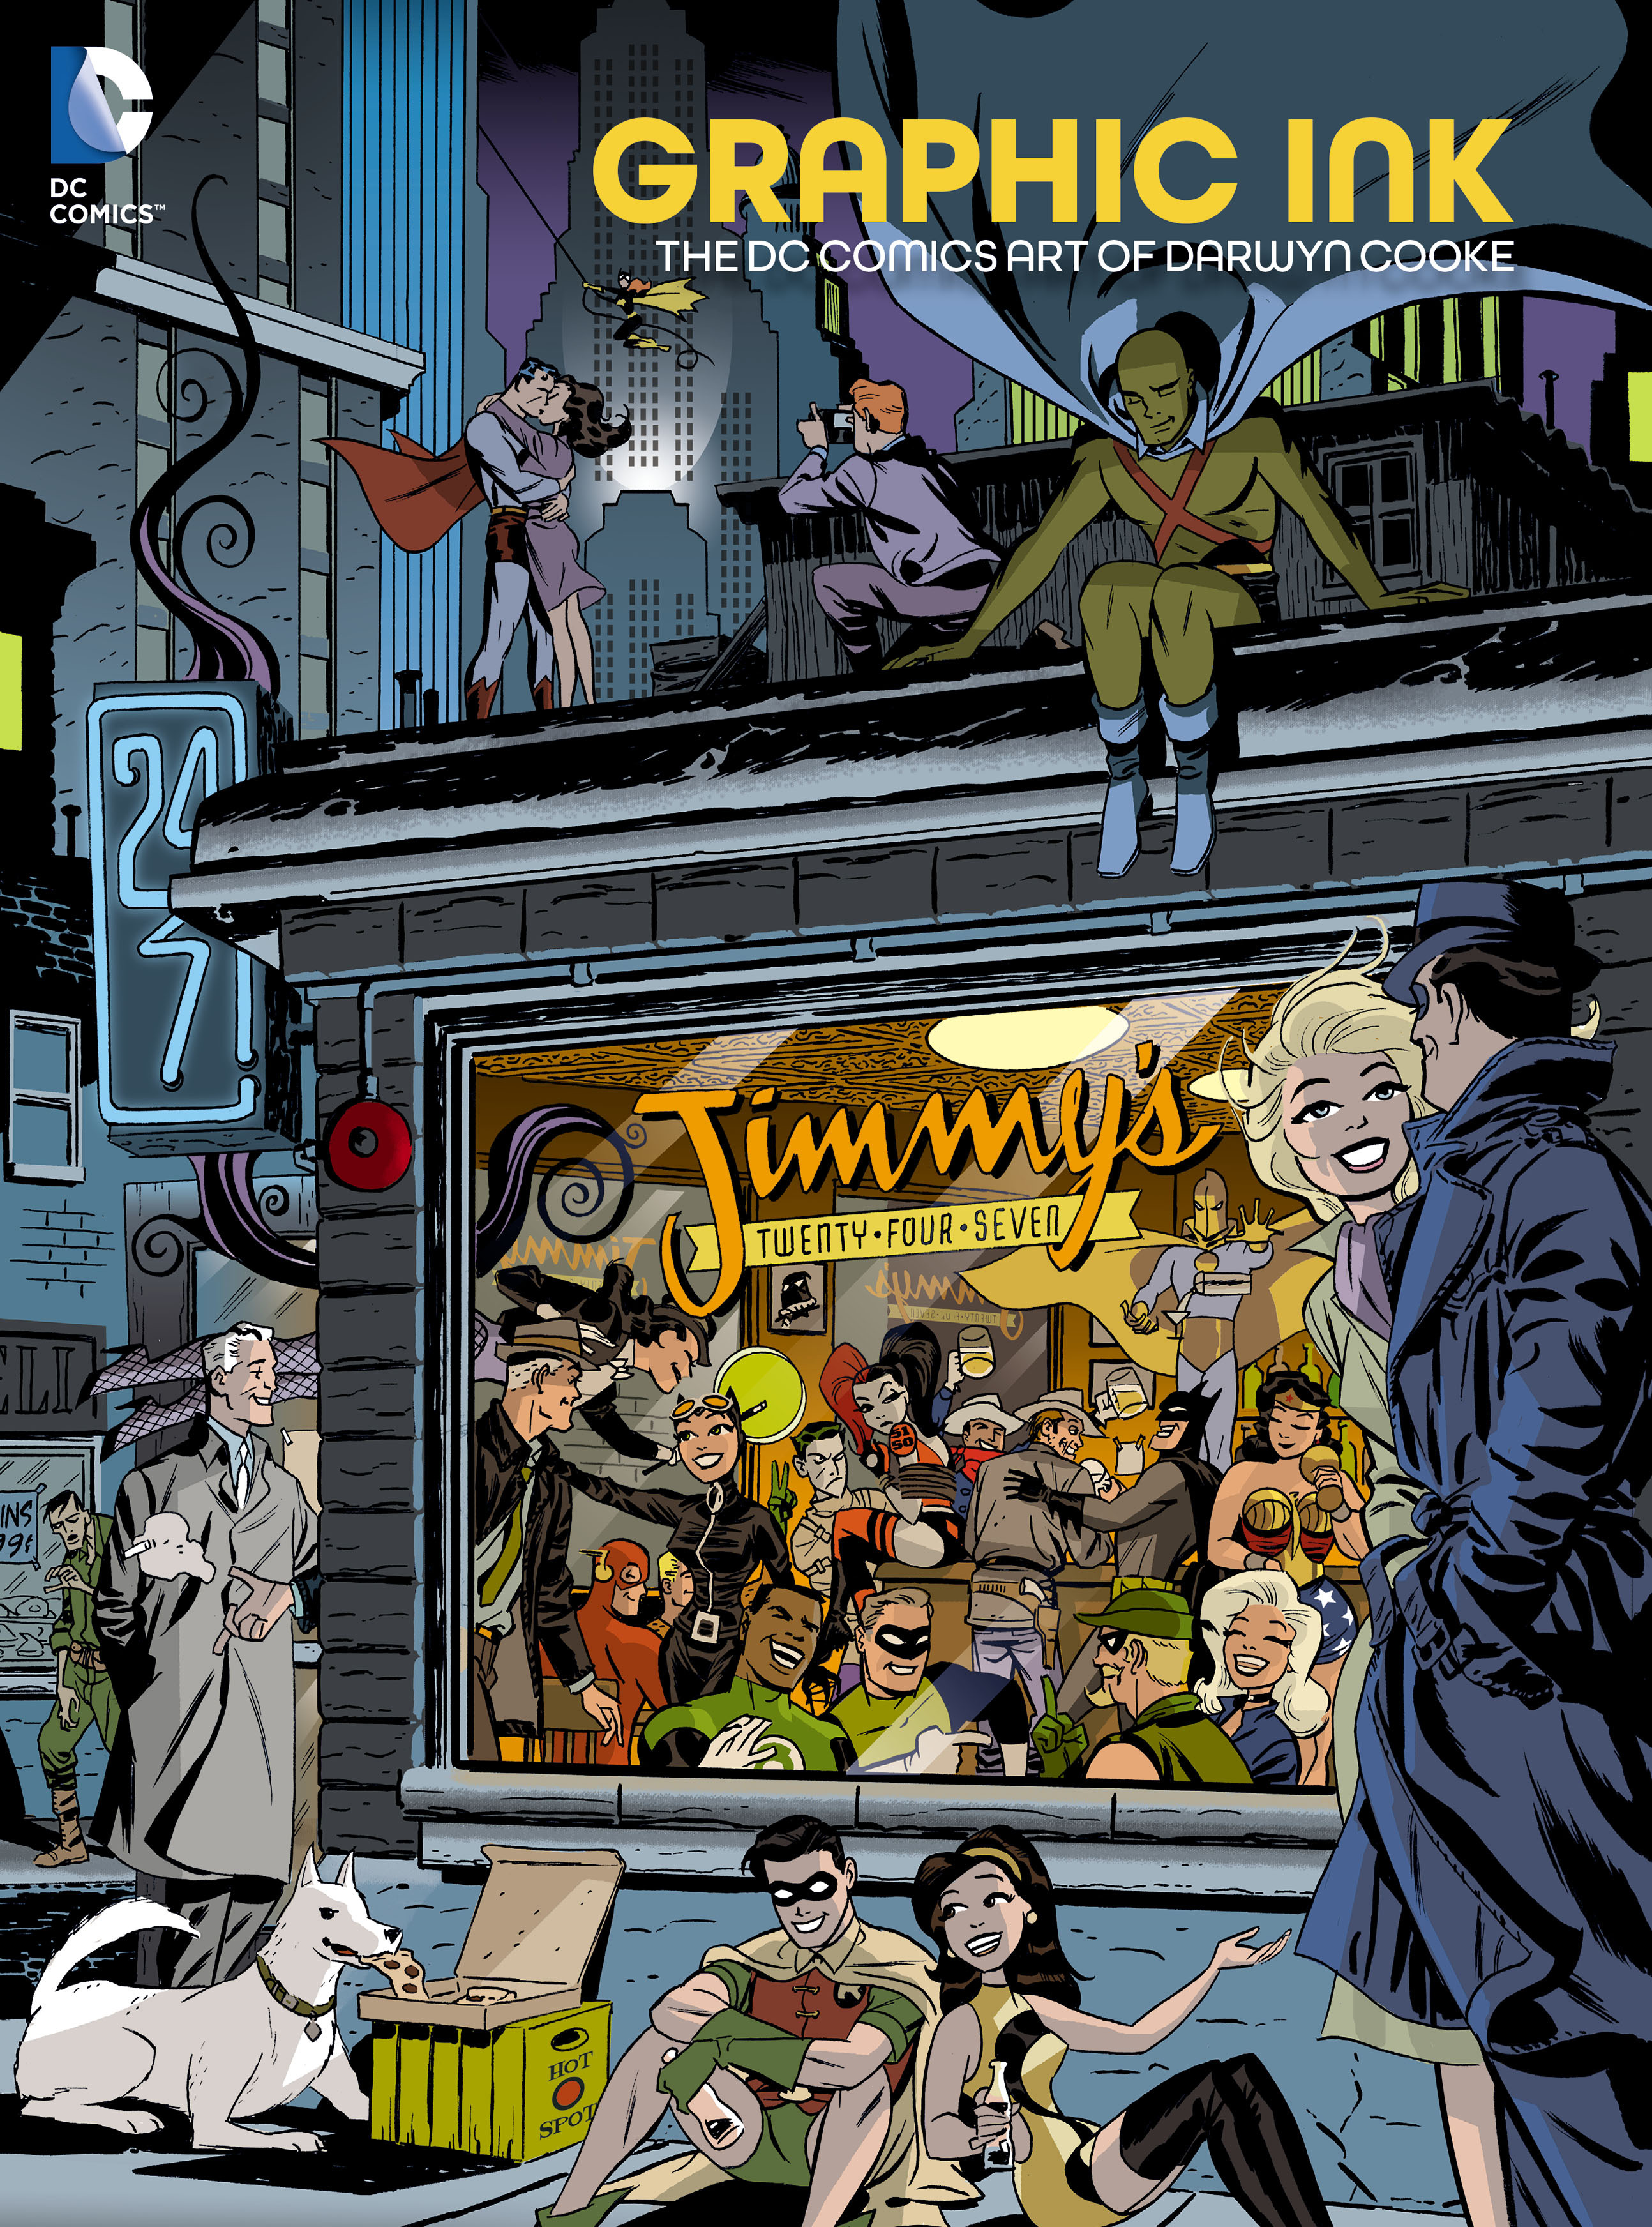 DC Comics Picture by Darwyn Cooke